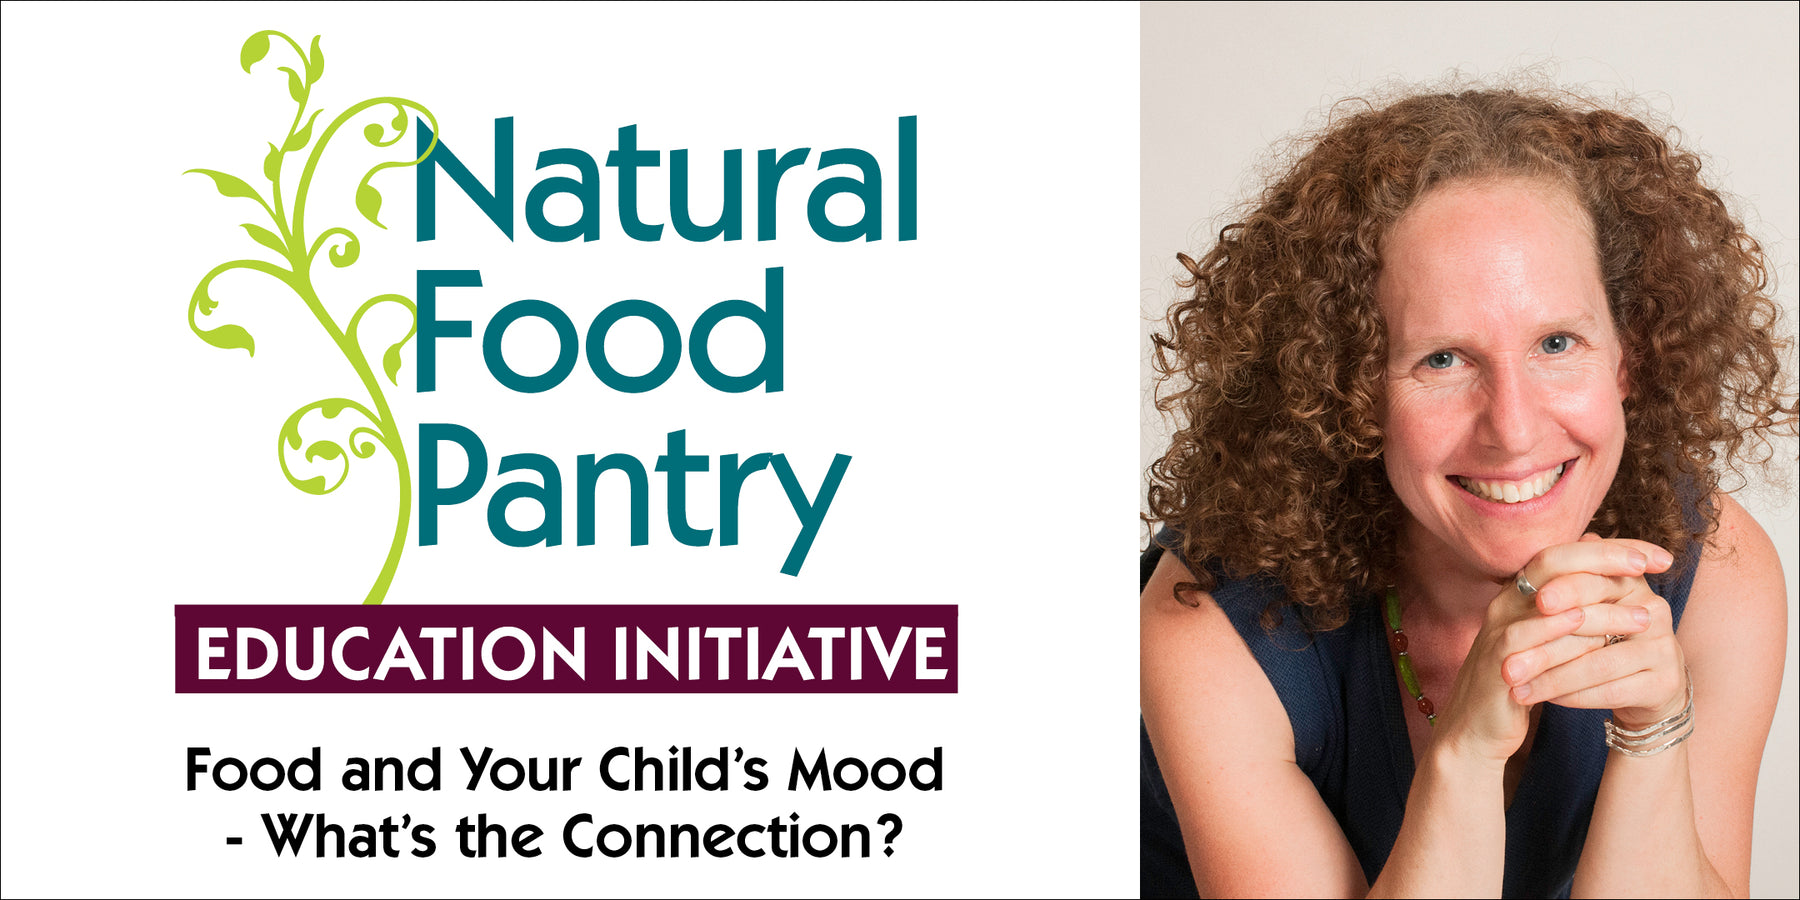 Jan 31: Food and Your Child’s Mood- What’s the Connection?